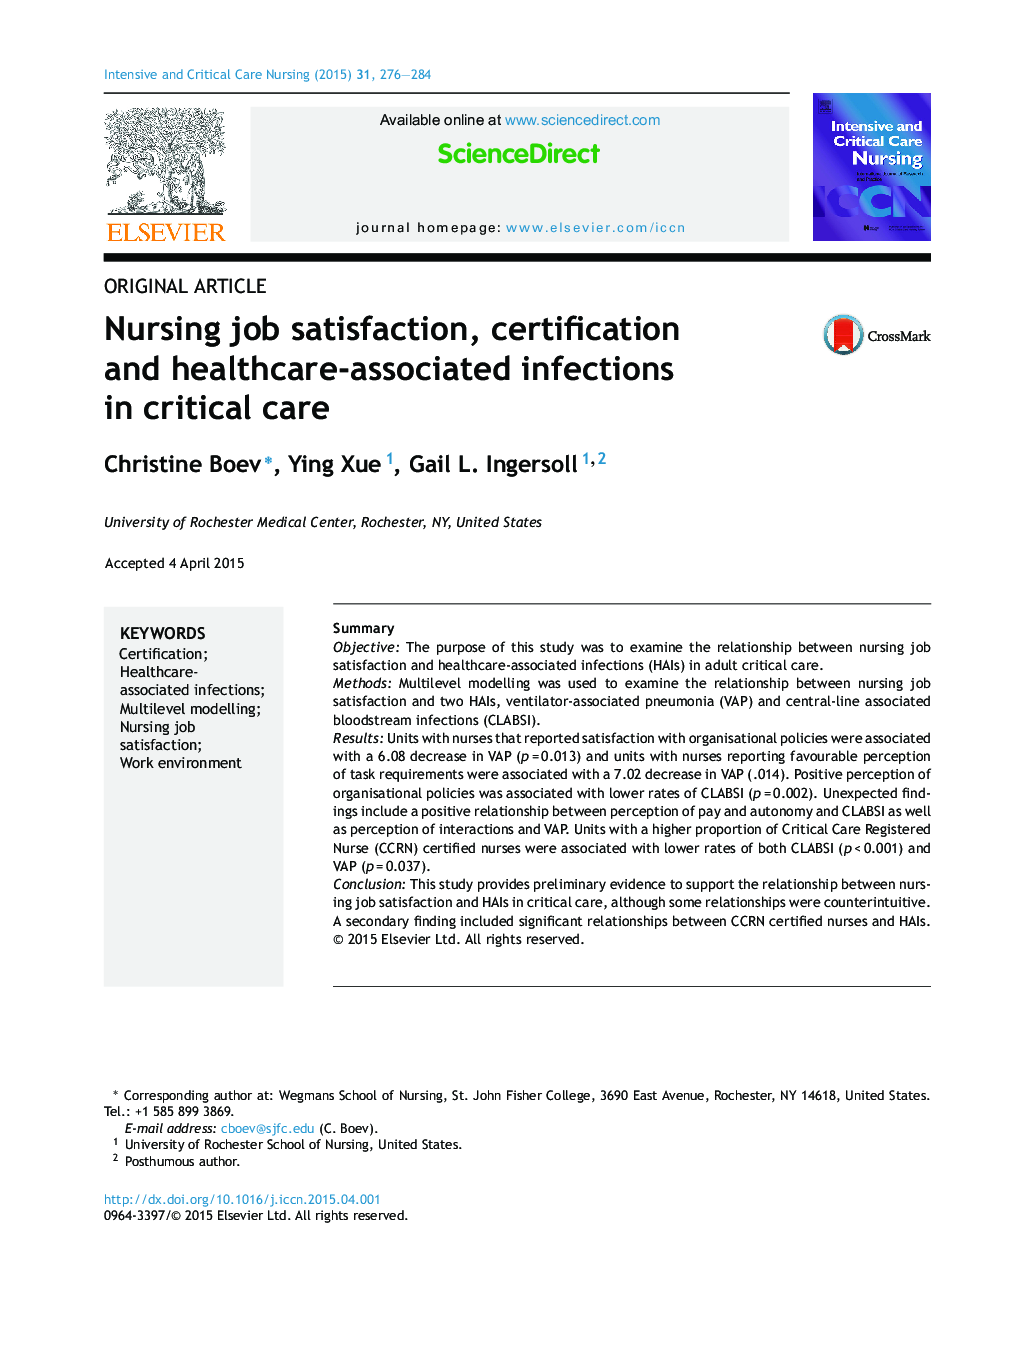 Nursing job satisfaction, certification and healthcare-associated infections in critical care